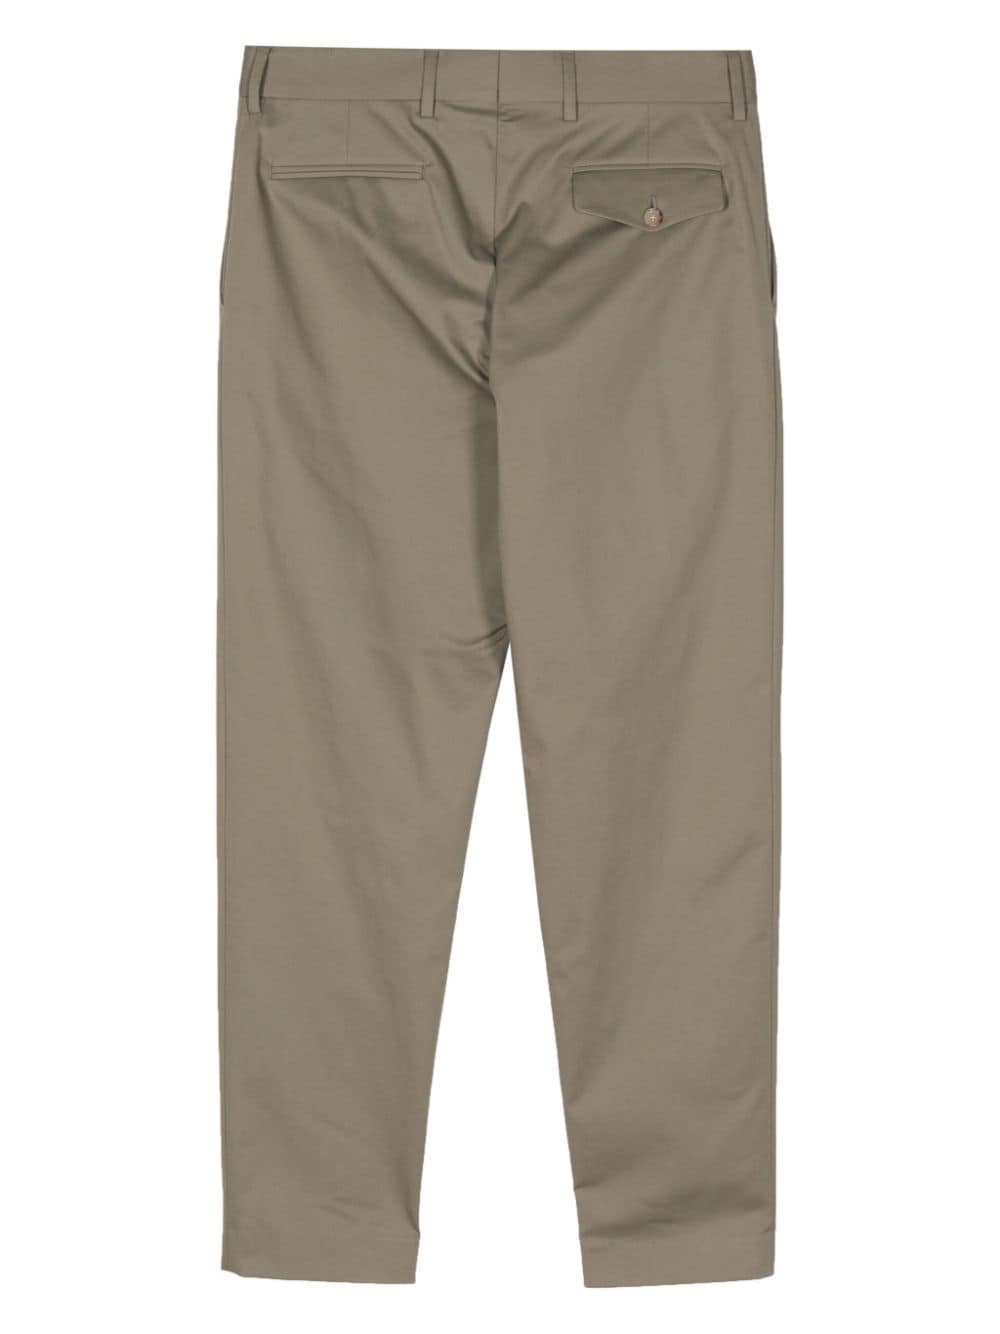 Paul Smith mid-rise slim-cut chino trousers - Beige